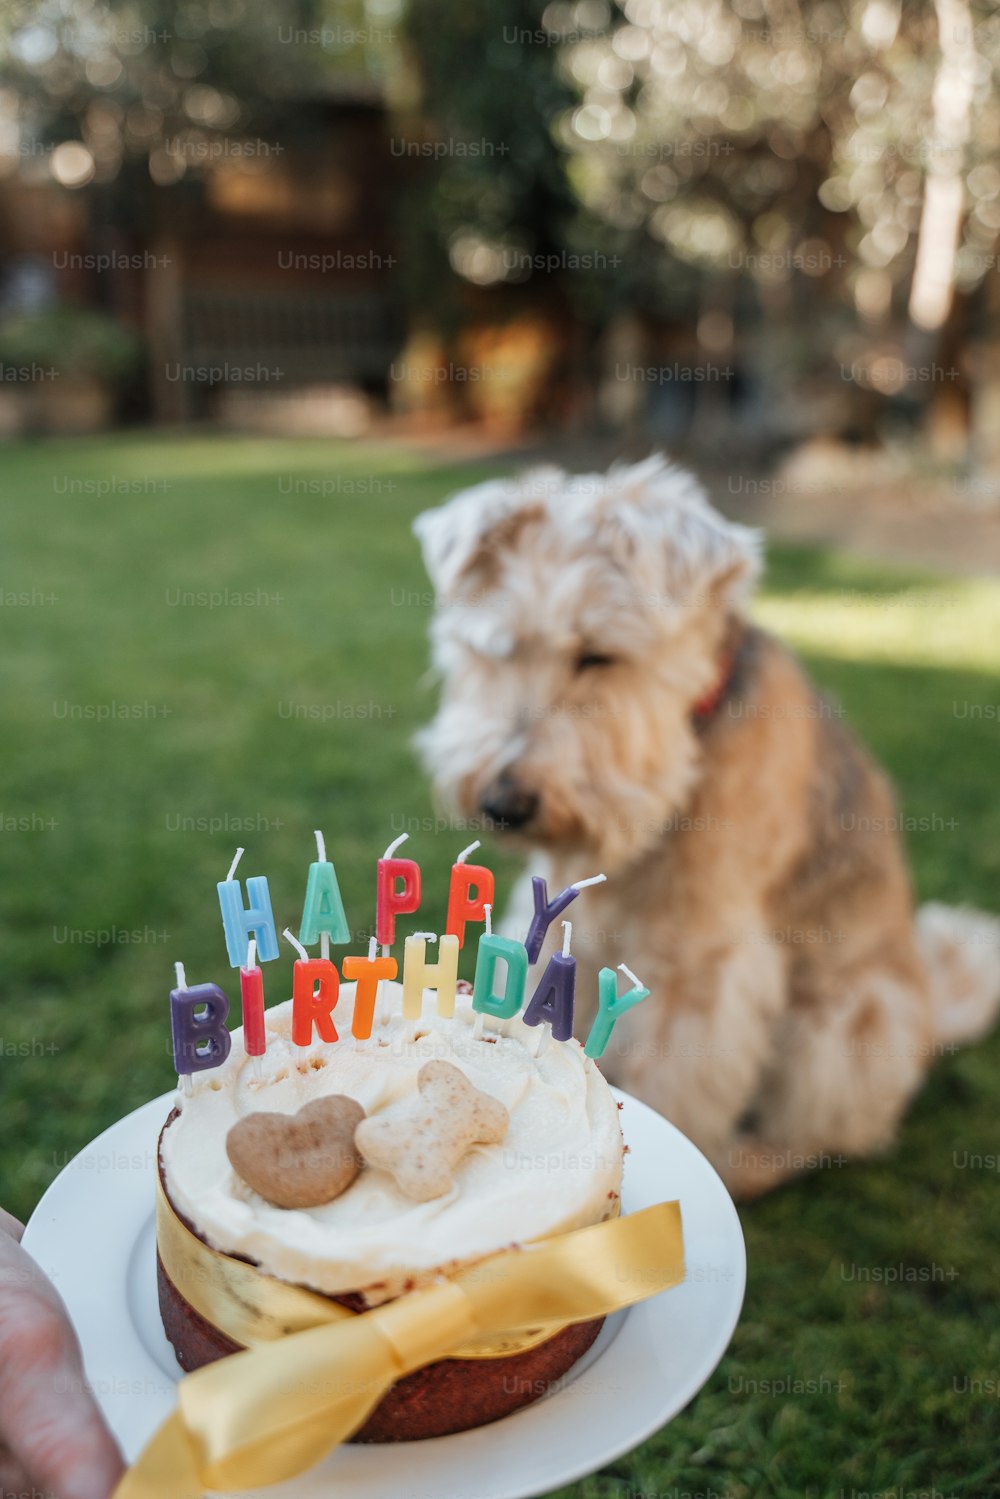 a small dog sitting next to a birthday cake